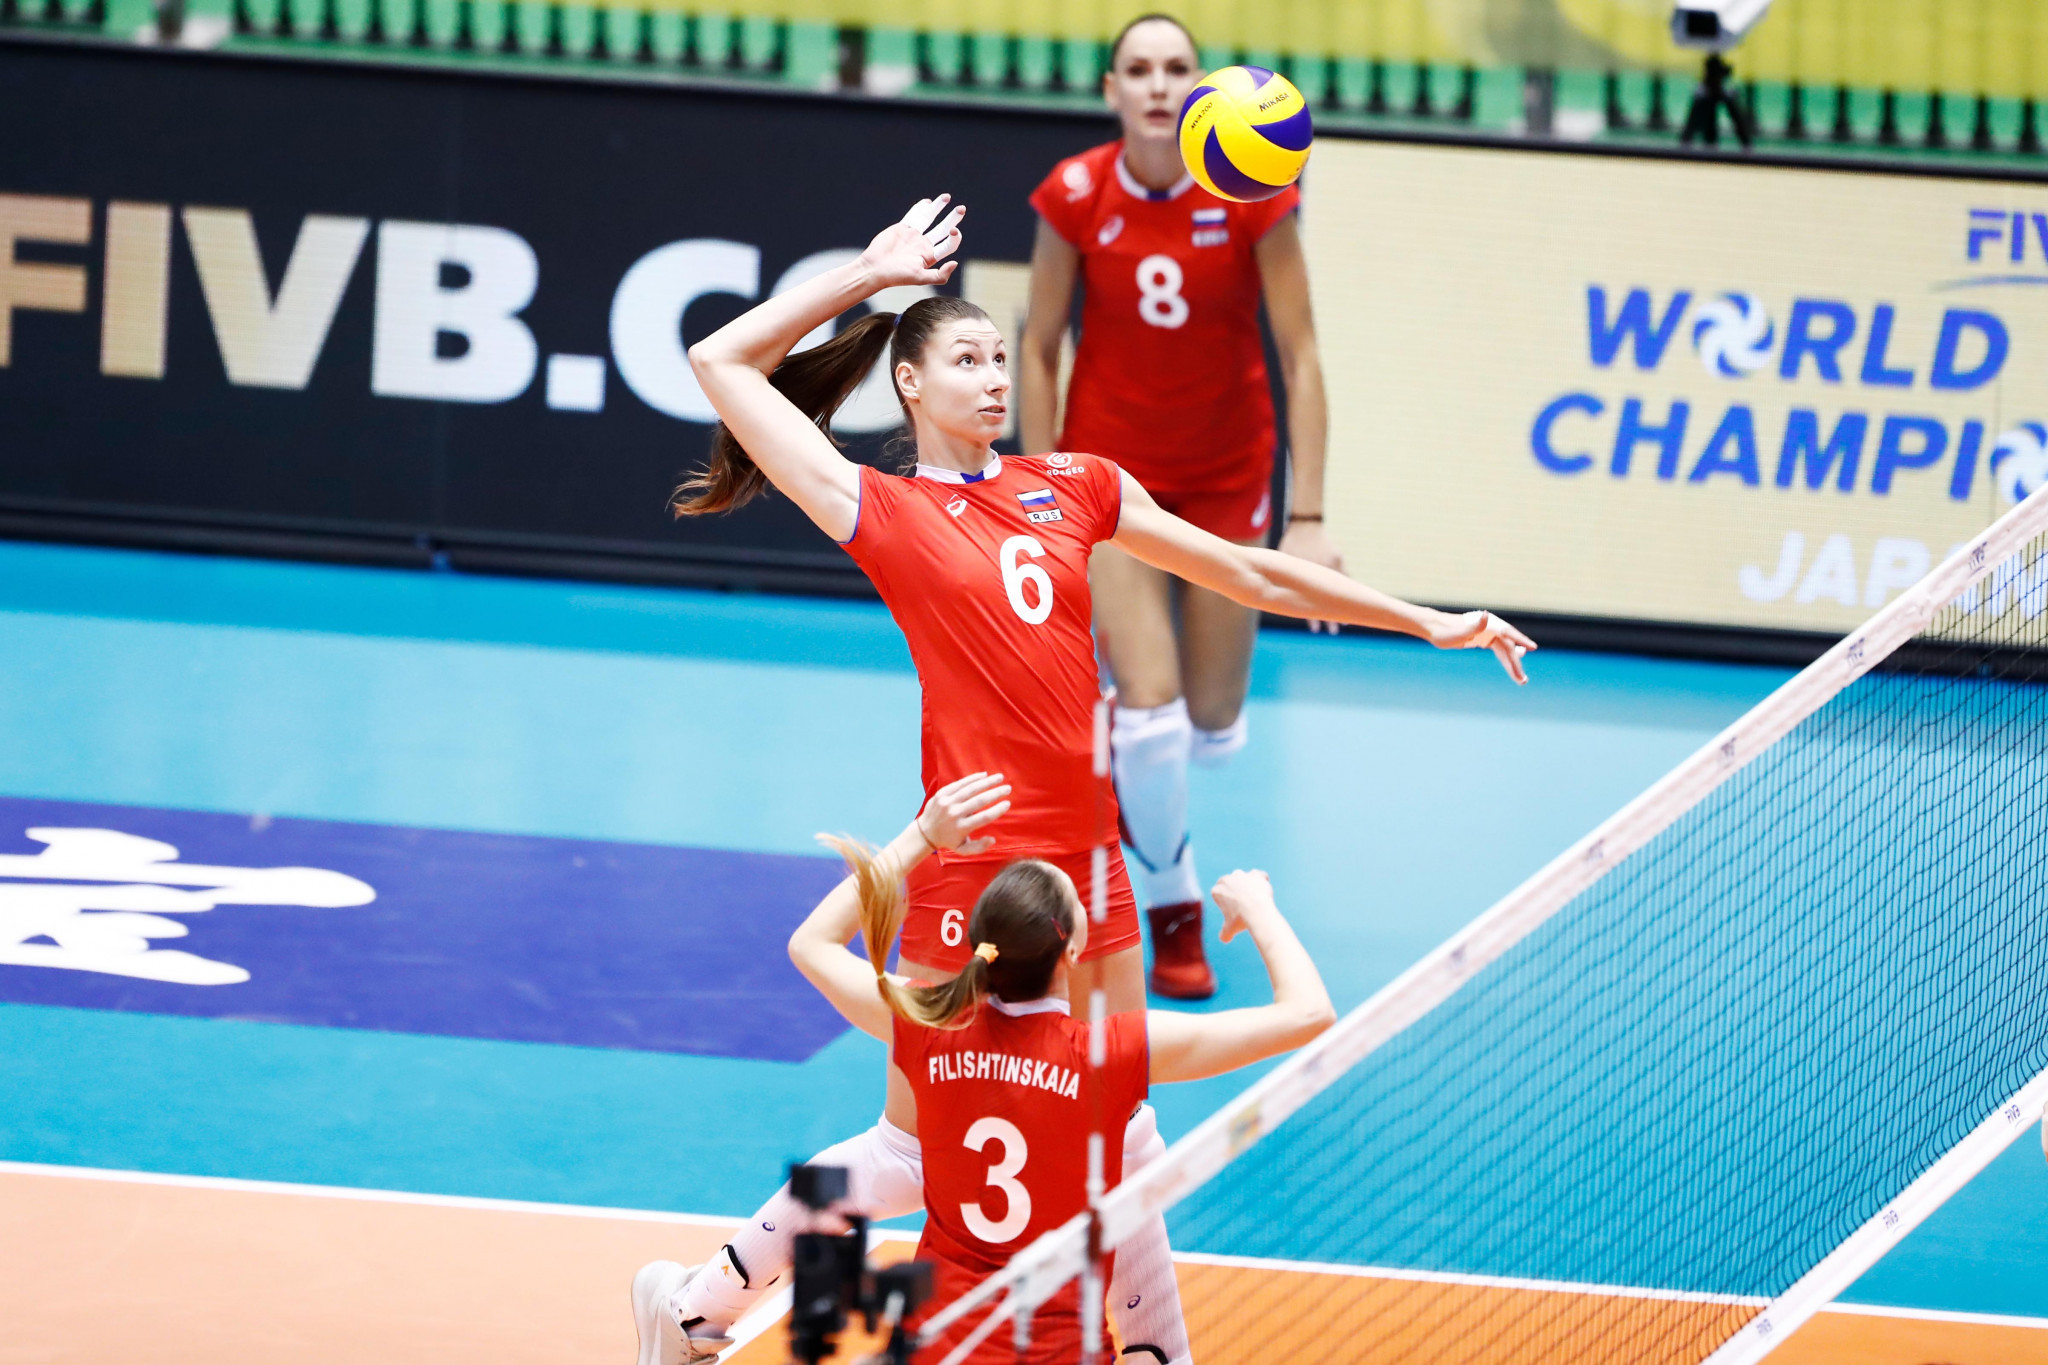 Russia saw off the challenge of hosts Japan to secure their first win of the tournament ©FIVB